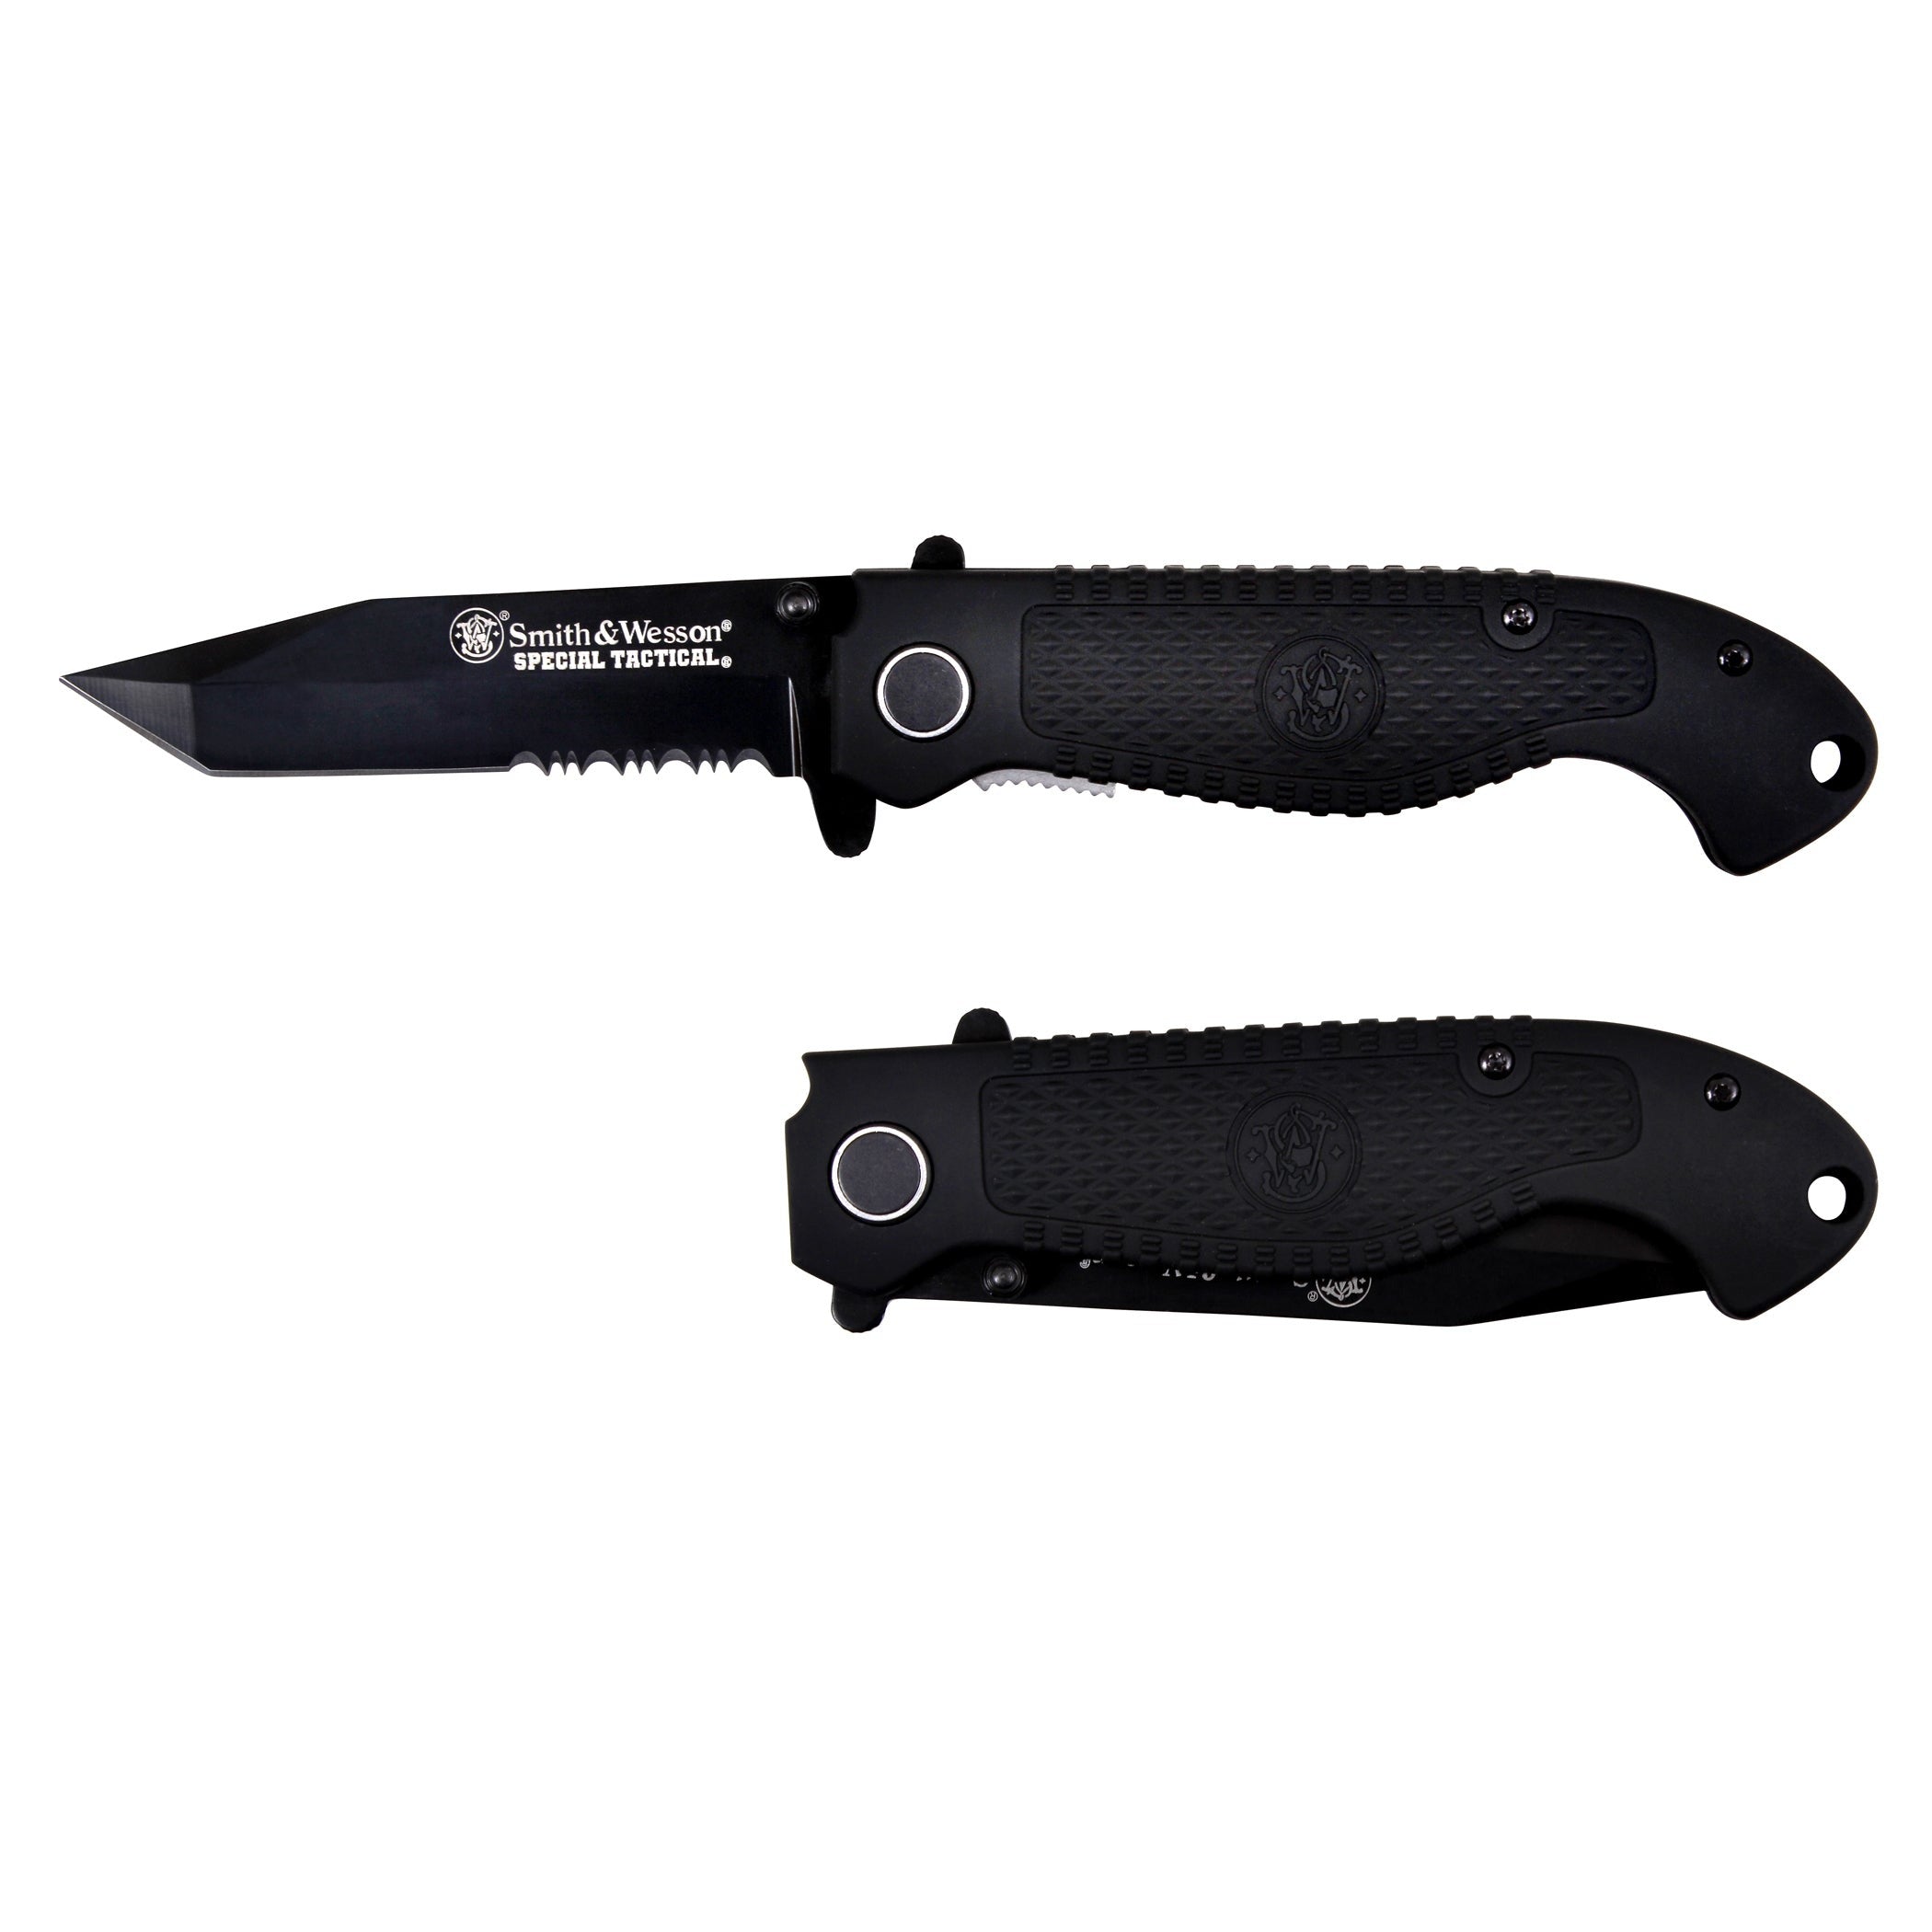 Smith & Wesson Special Tactical Folding Knife - The Bikers' Den